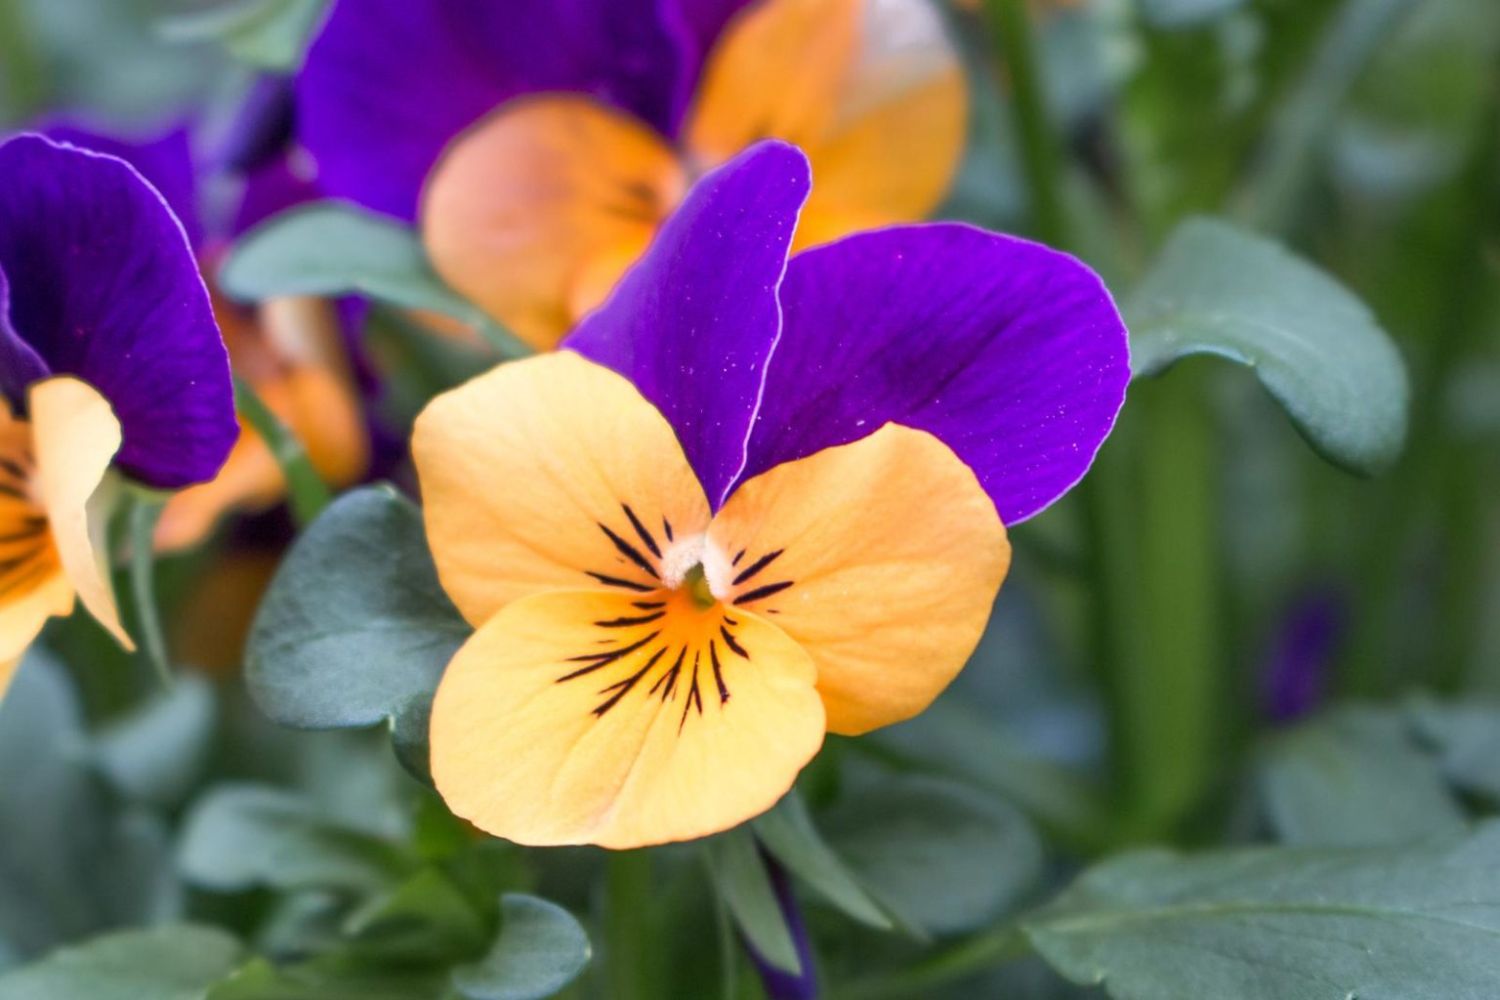 A purple and orange pansy flower